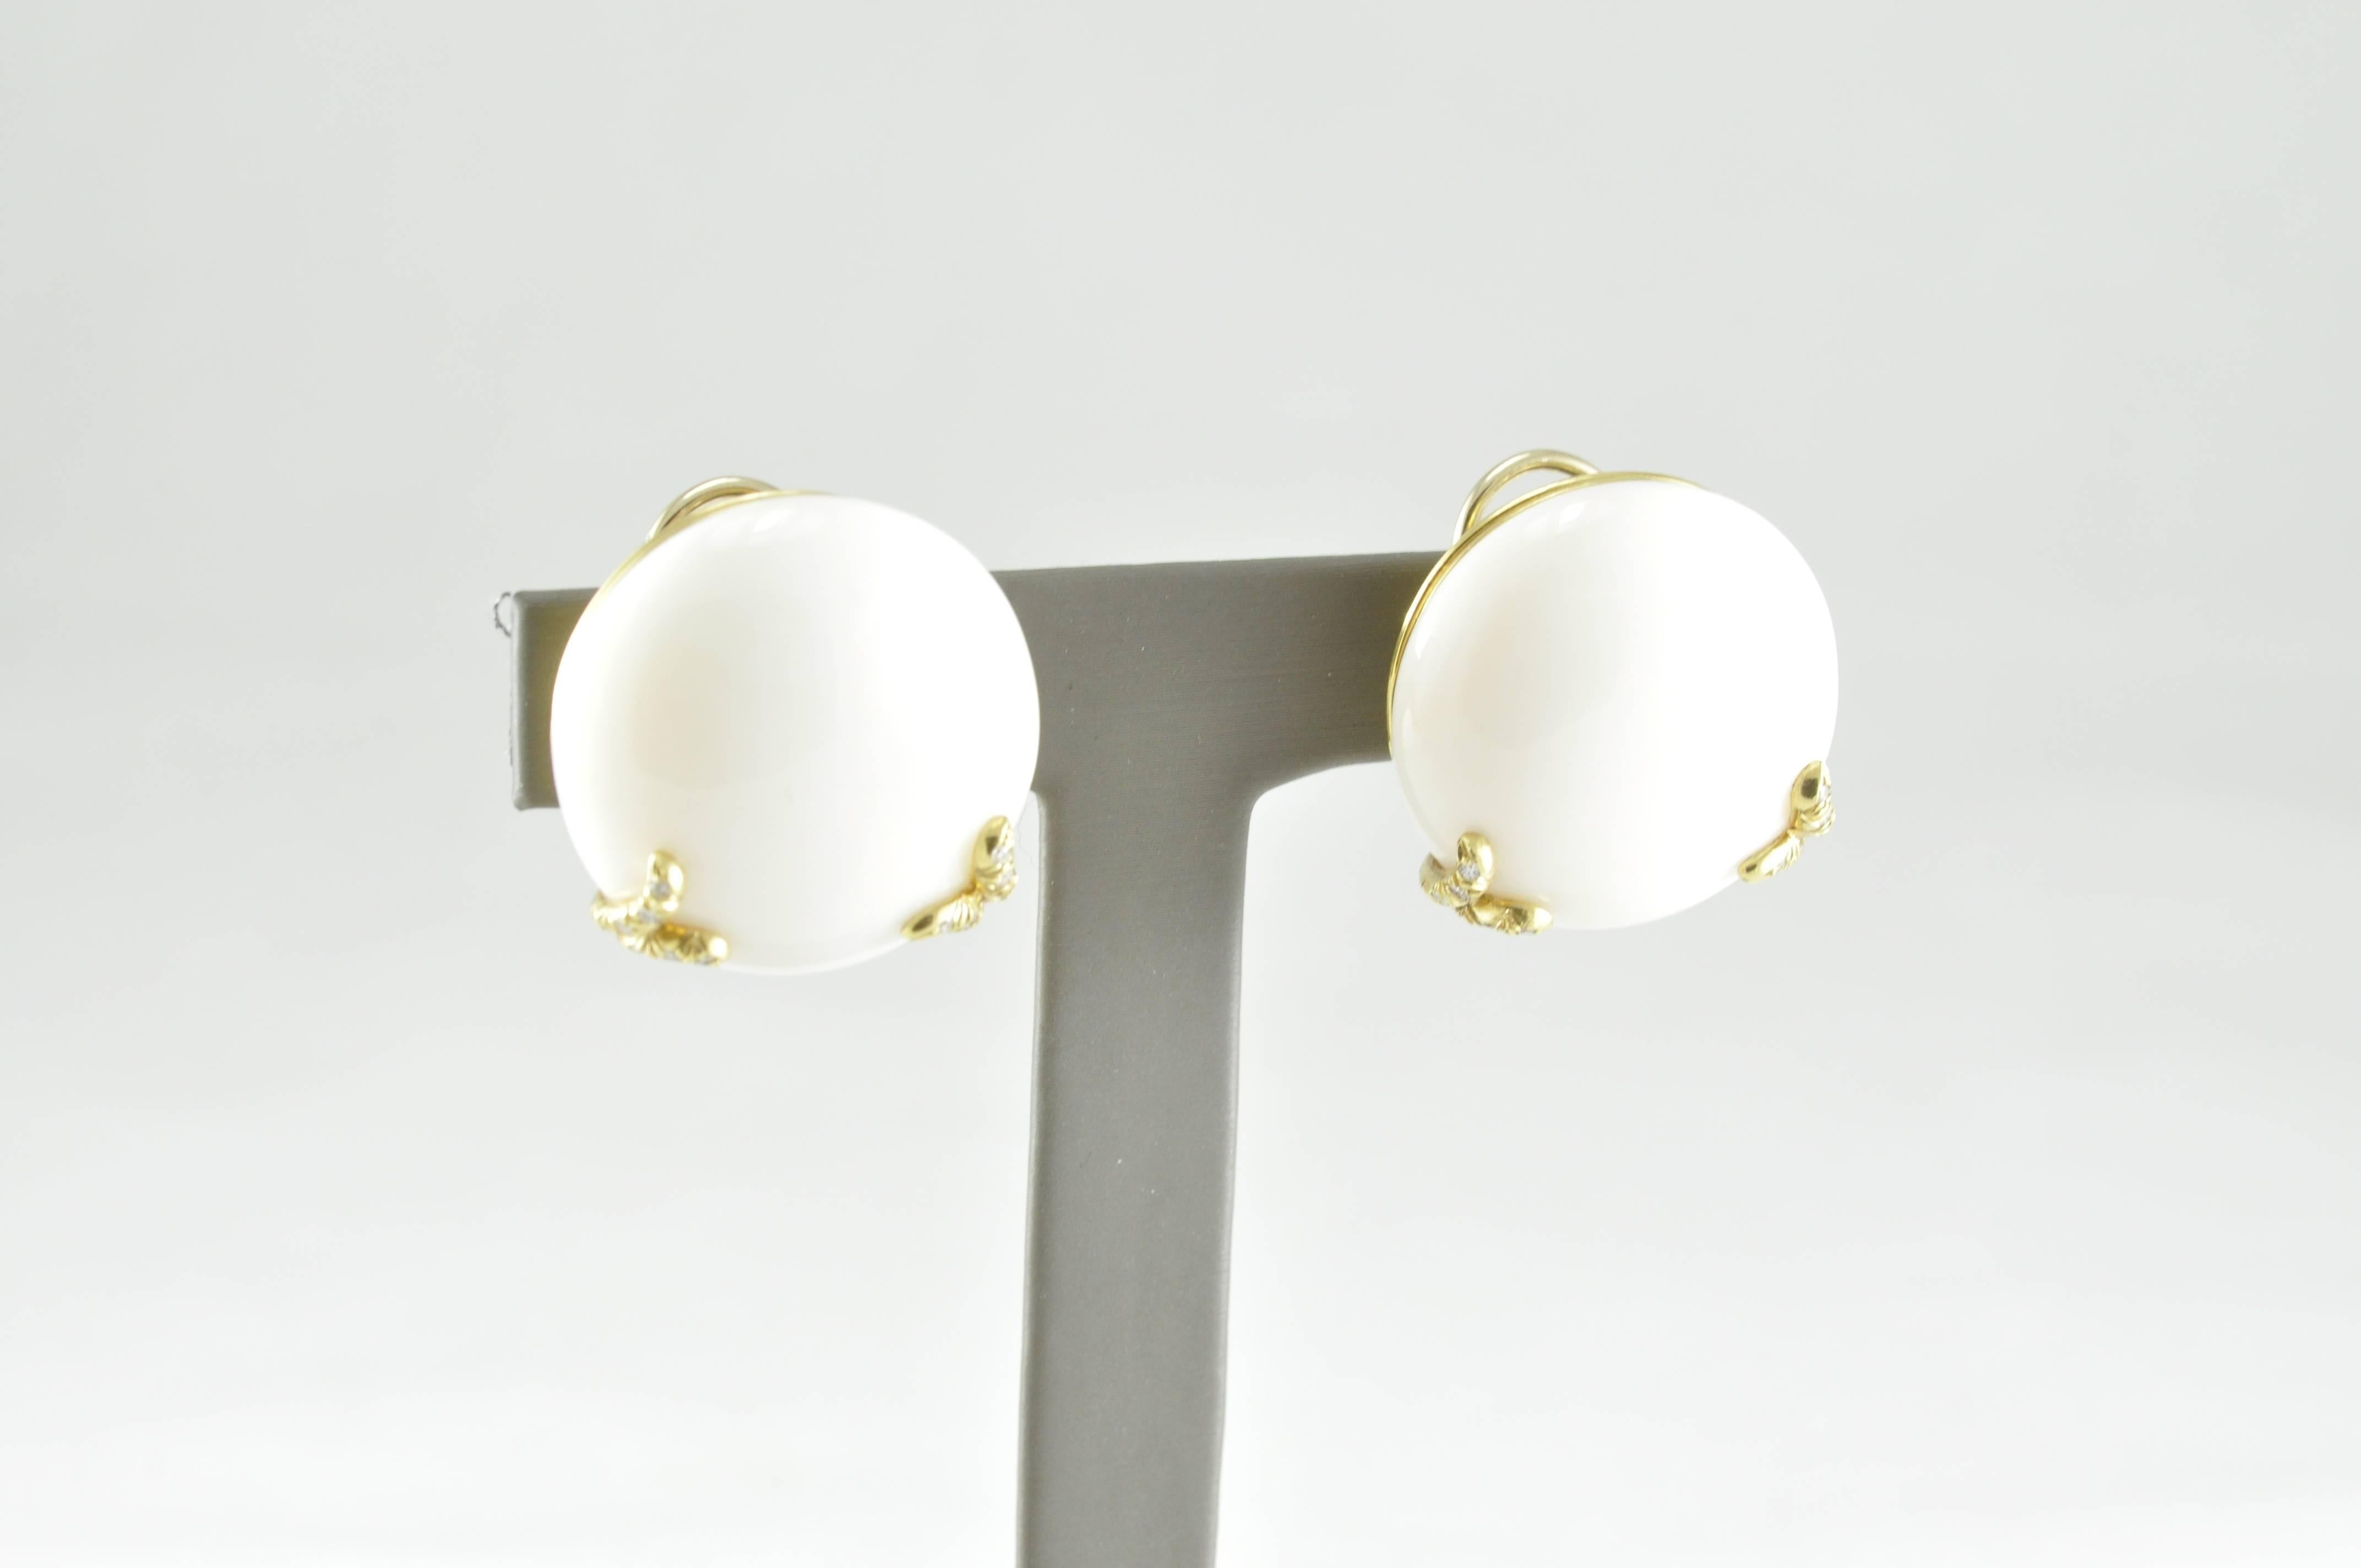 Exquisite Henry Dunay White Coral Earrings in 18k Yellow Gold featuring 0.36ct round Diamonds. These shining examples of Dunay's quality and craftsmanship are also fabulous investment pieces, as his notoriety continues to grow within the